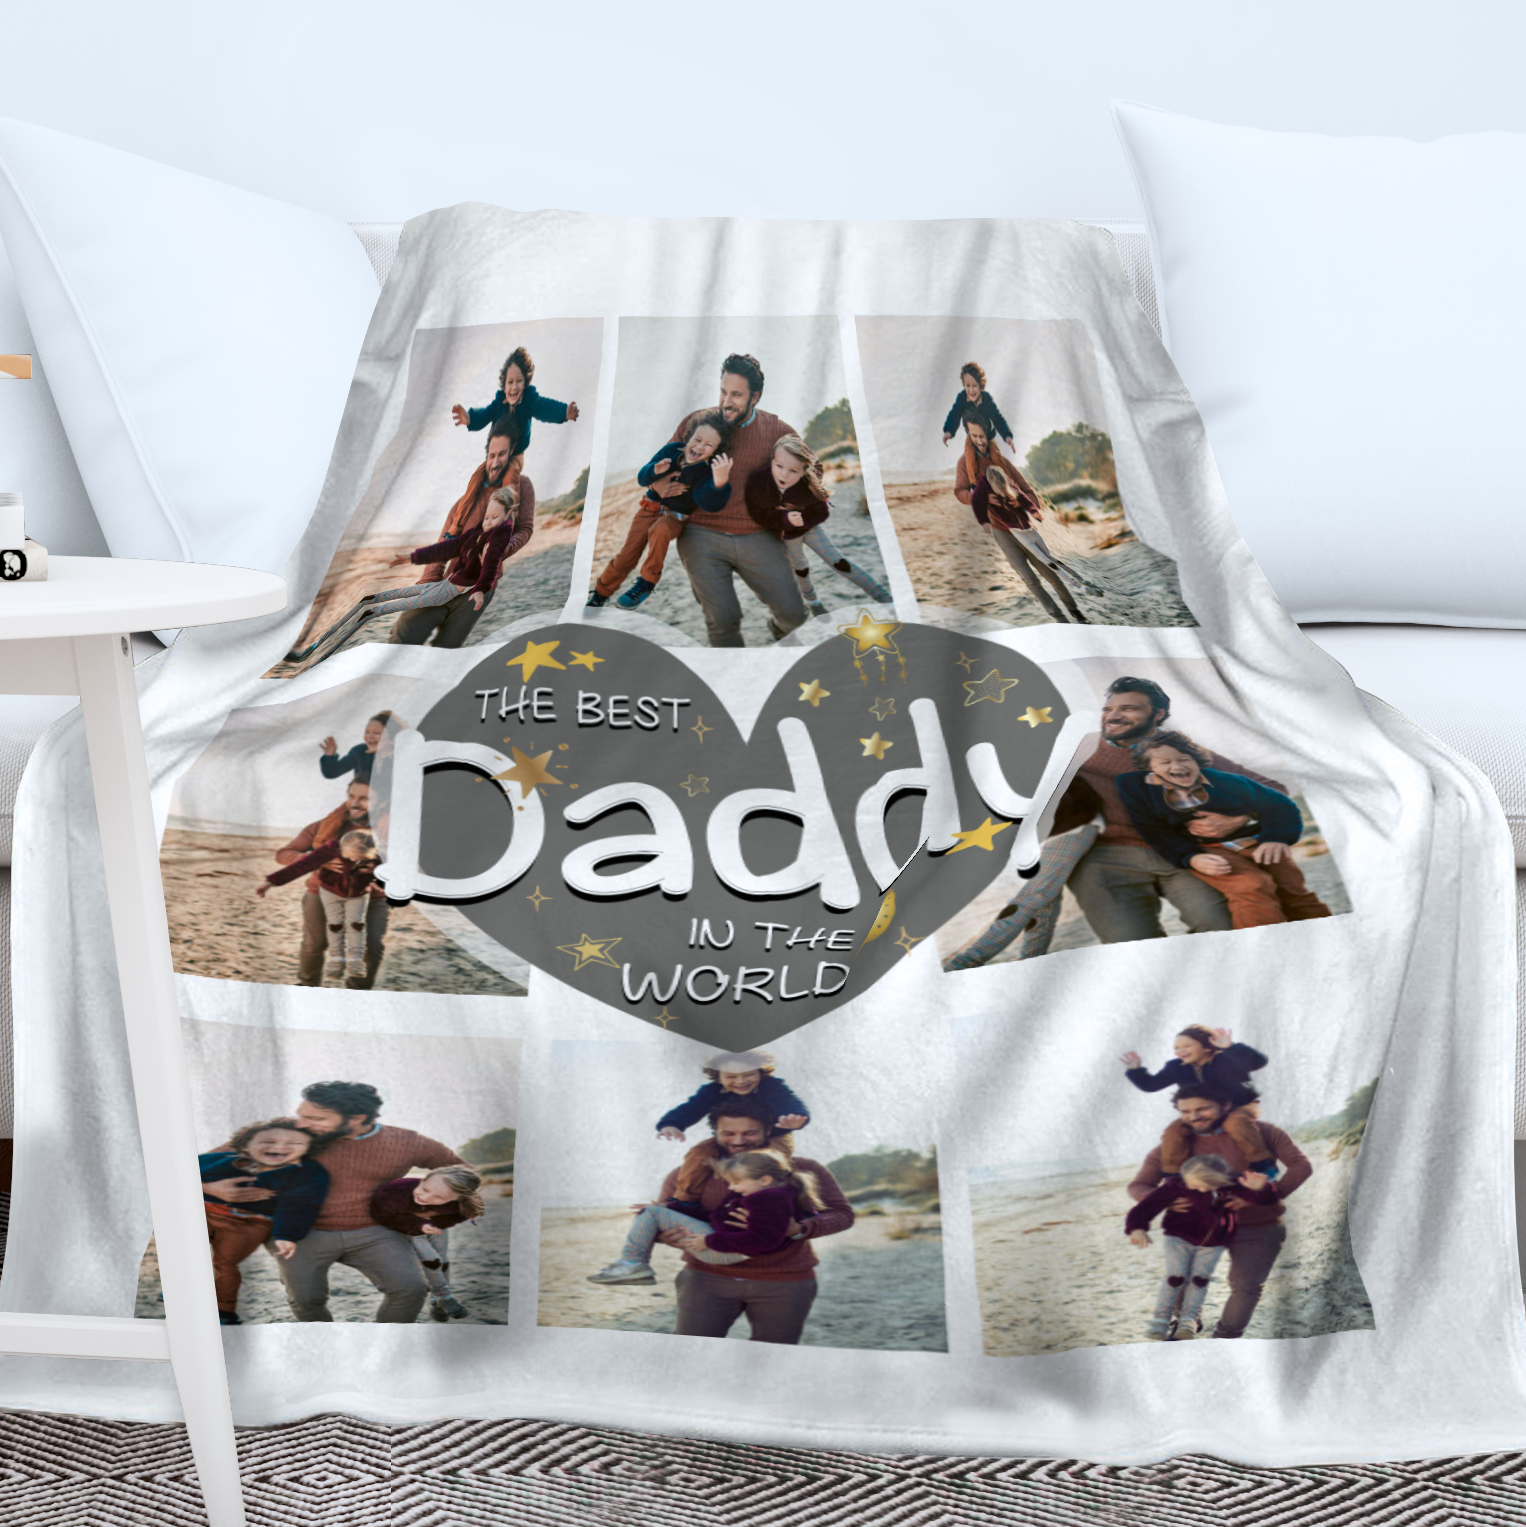 Papa Fishing Blanket, Fathers Day Blankets